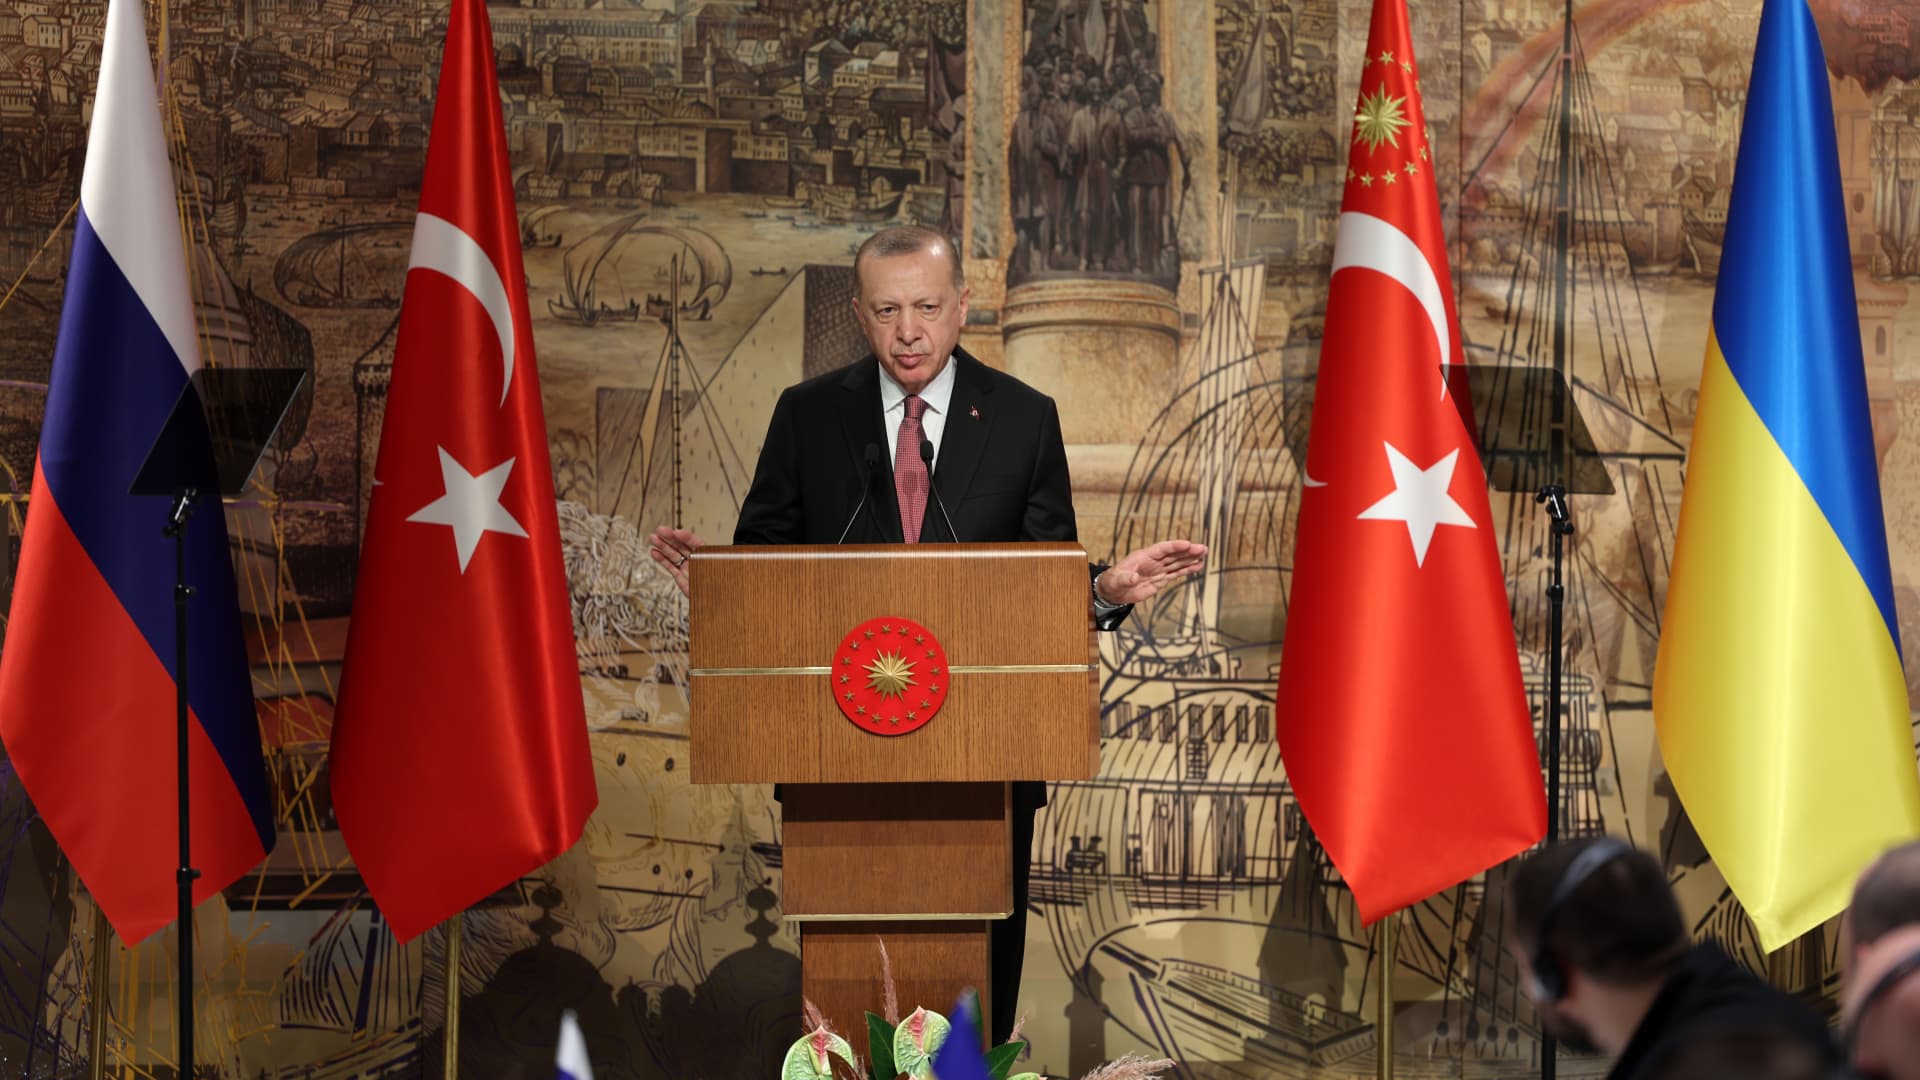 Turkish President Recep Tayyip Erdogan speaks ahead of the peace talks between delegations from Russia and Ukraine at Dolmabahce Presidential Office in Istanbul, Turkiye on March 29, 2022.